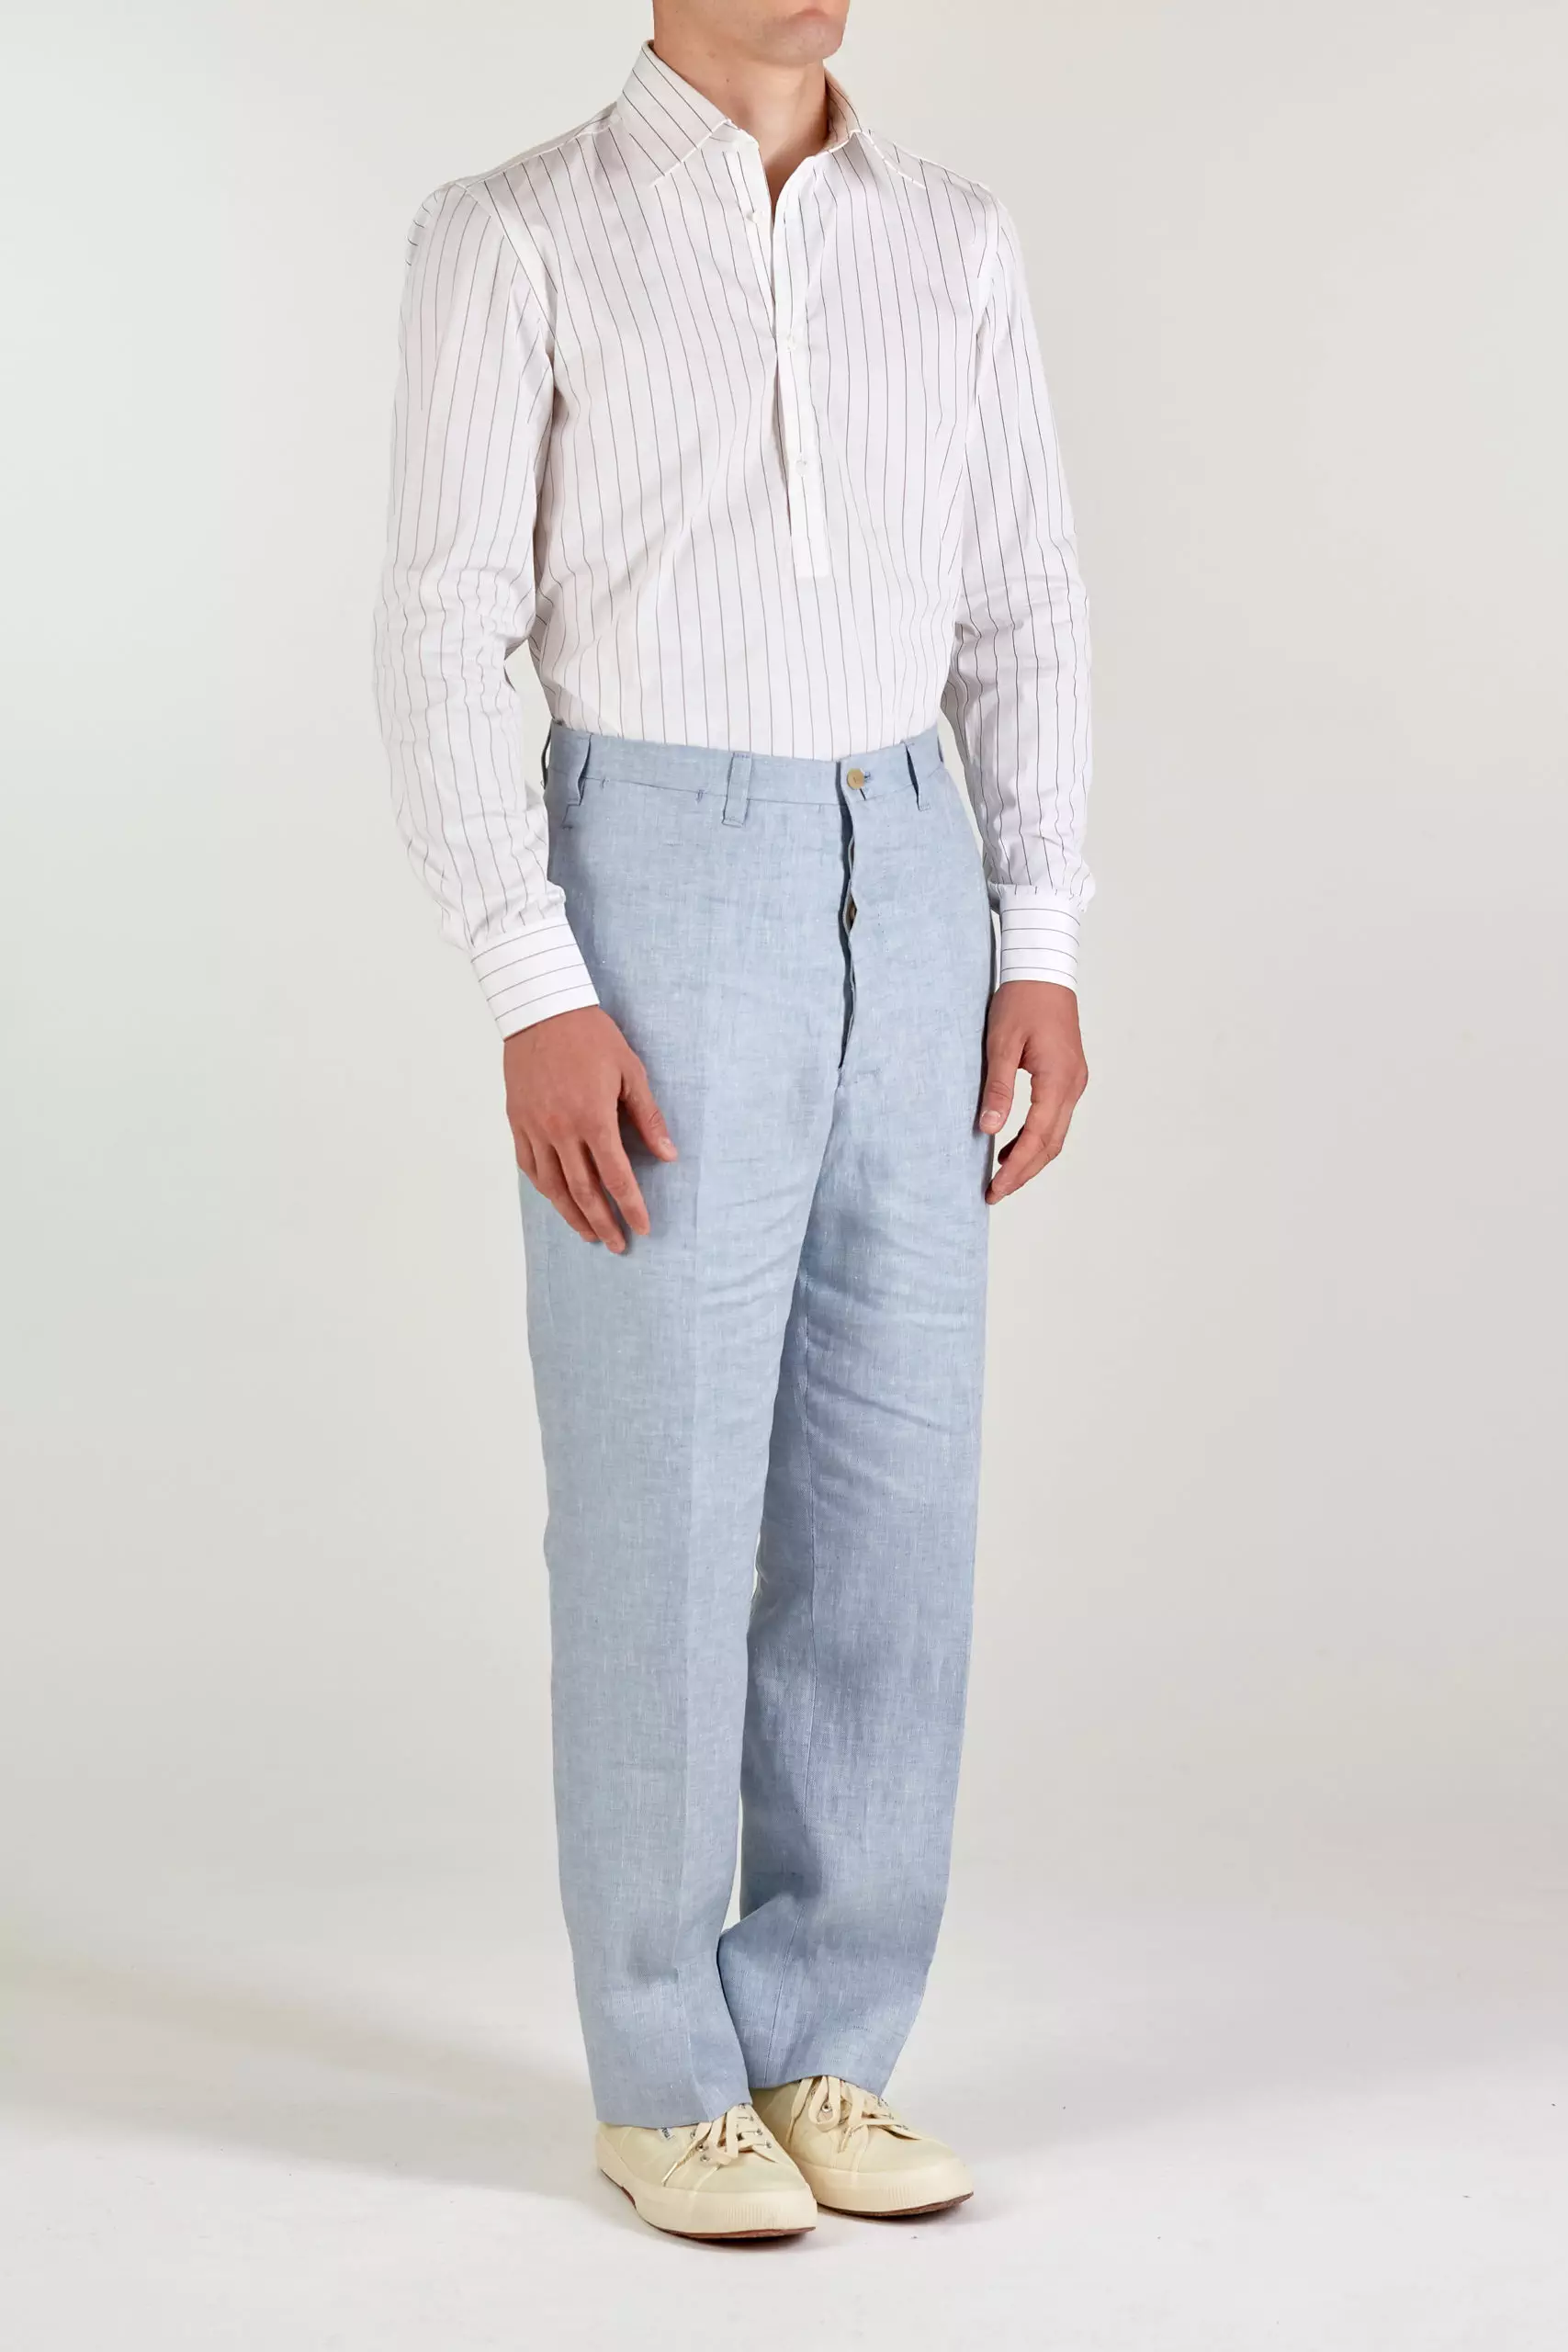 Men's Linen Pants - Tailored, Relaxed, and Casual Linen Pants | SUITSUPPLY  US